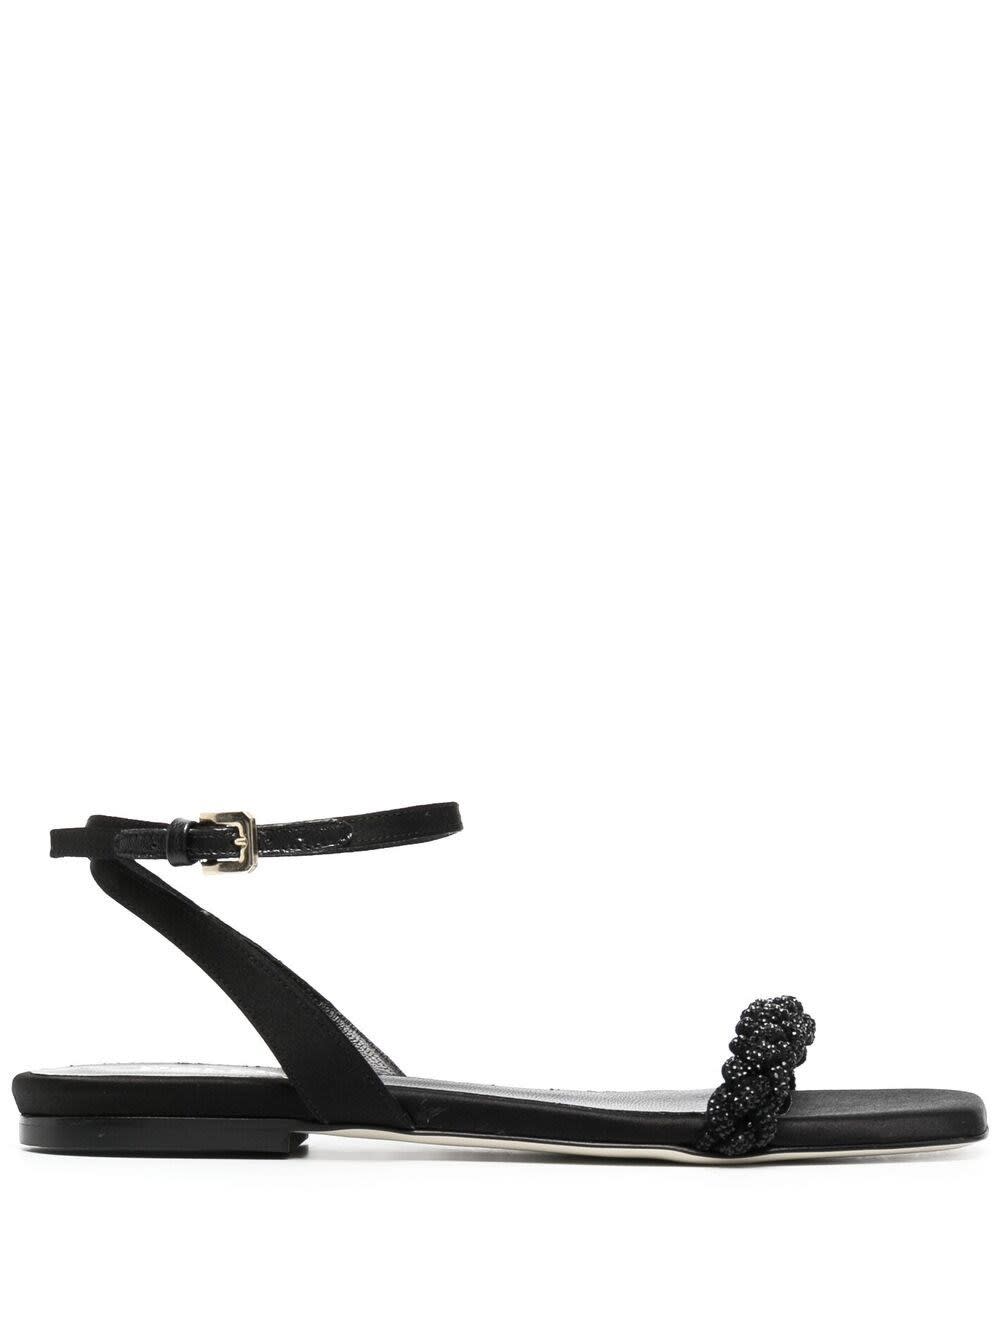 Pollini BLACK LEATHER AND SATIN SANDALS WITH BRAIDED STRAP